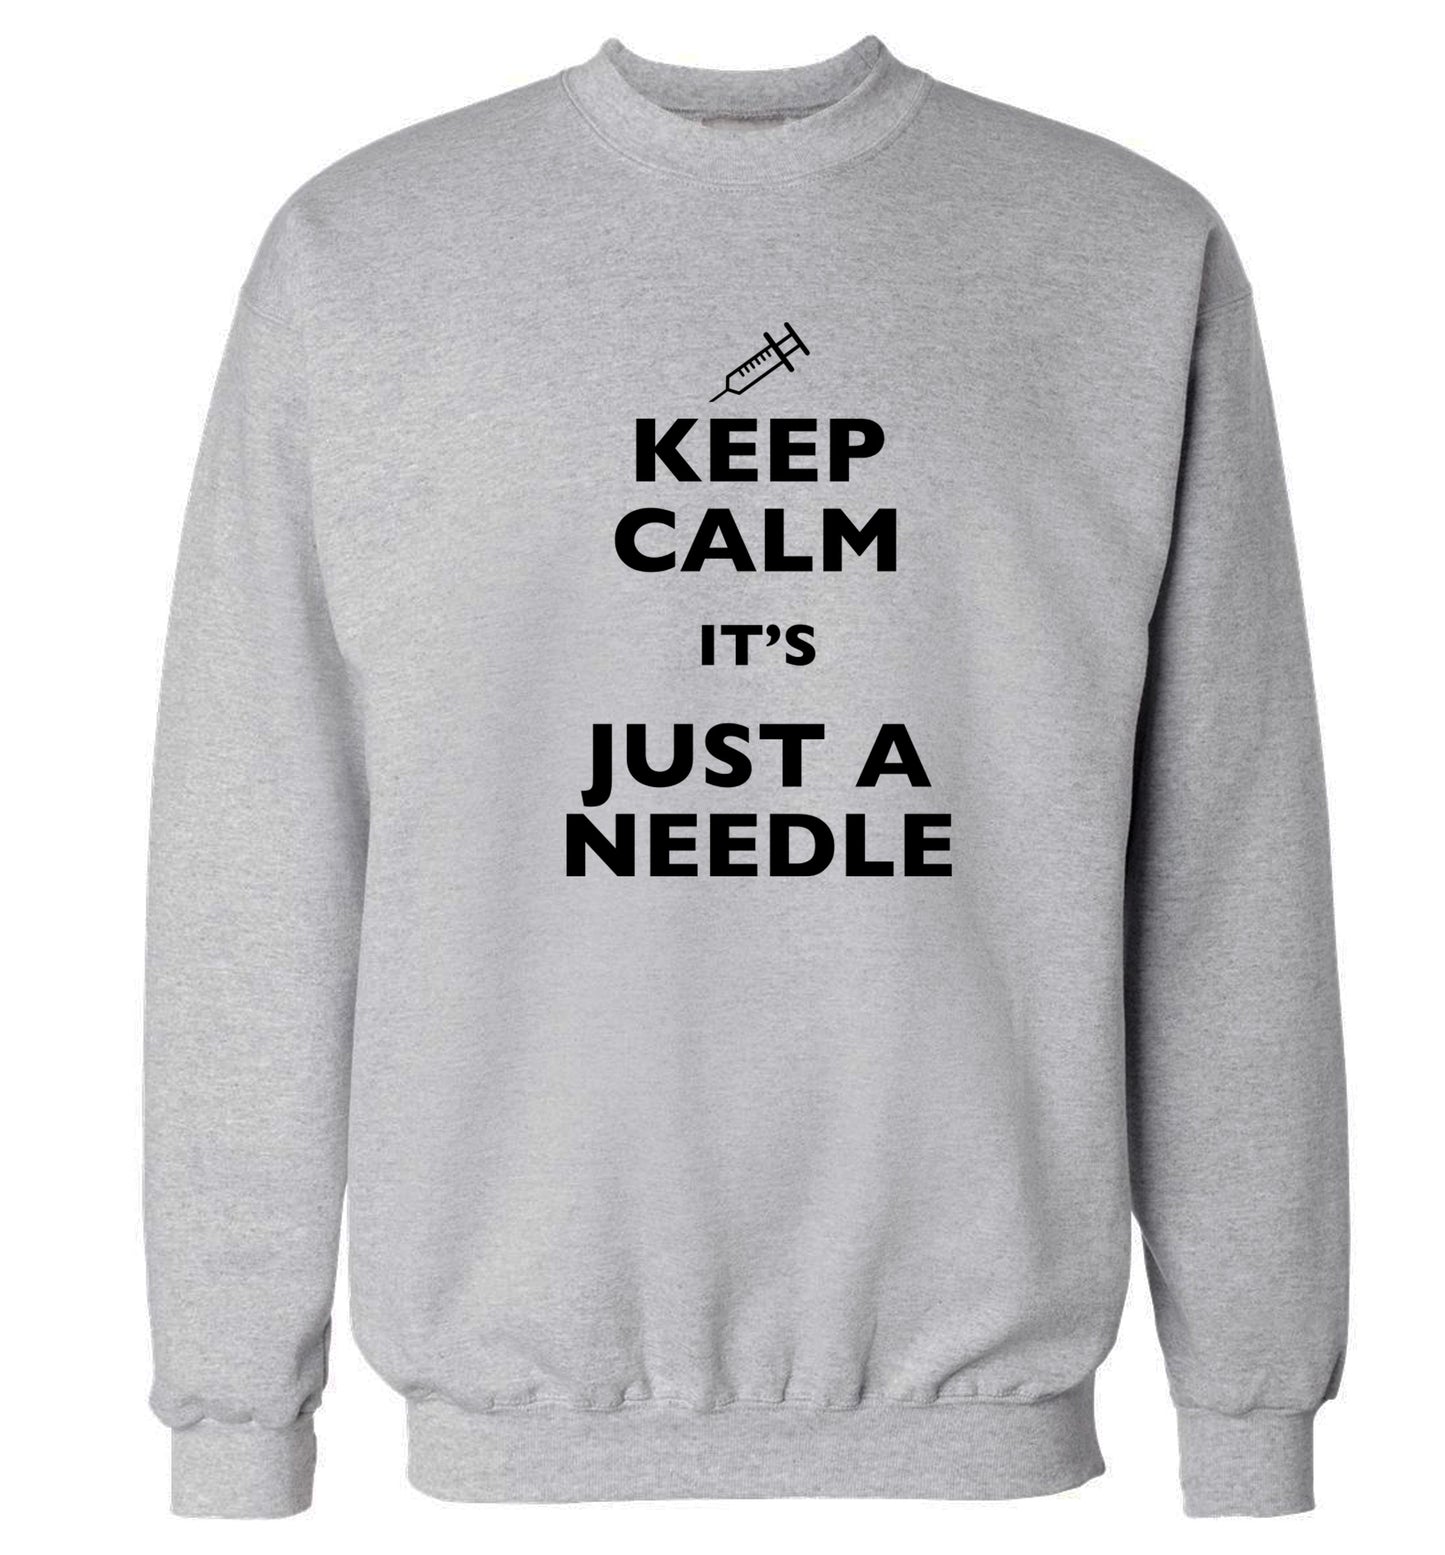 Keep calm it's only a needle Adult's unisex grey Sweater 2XL